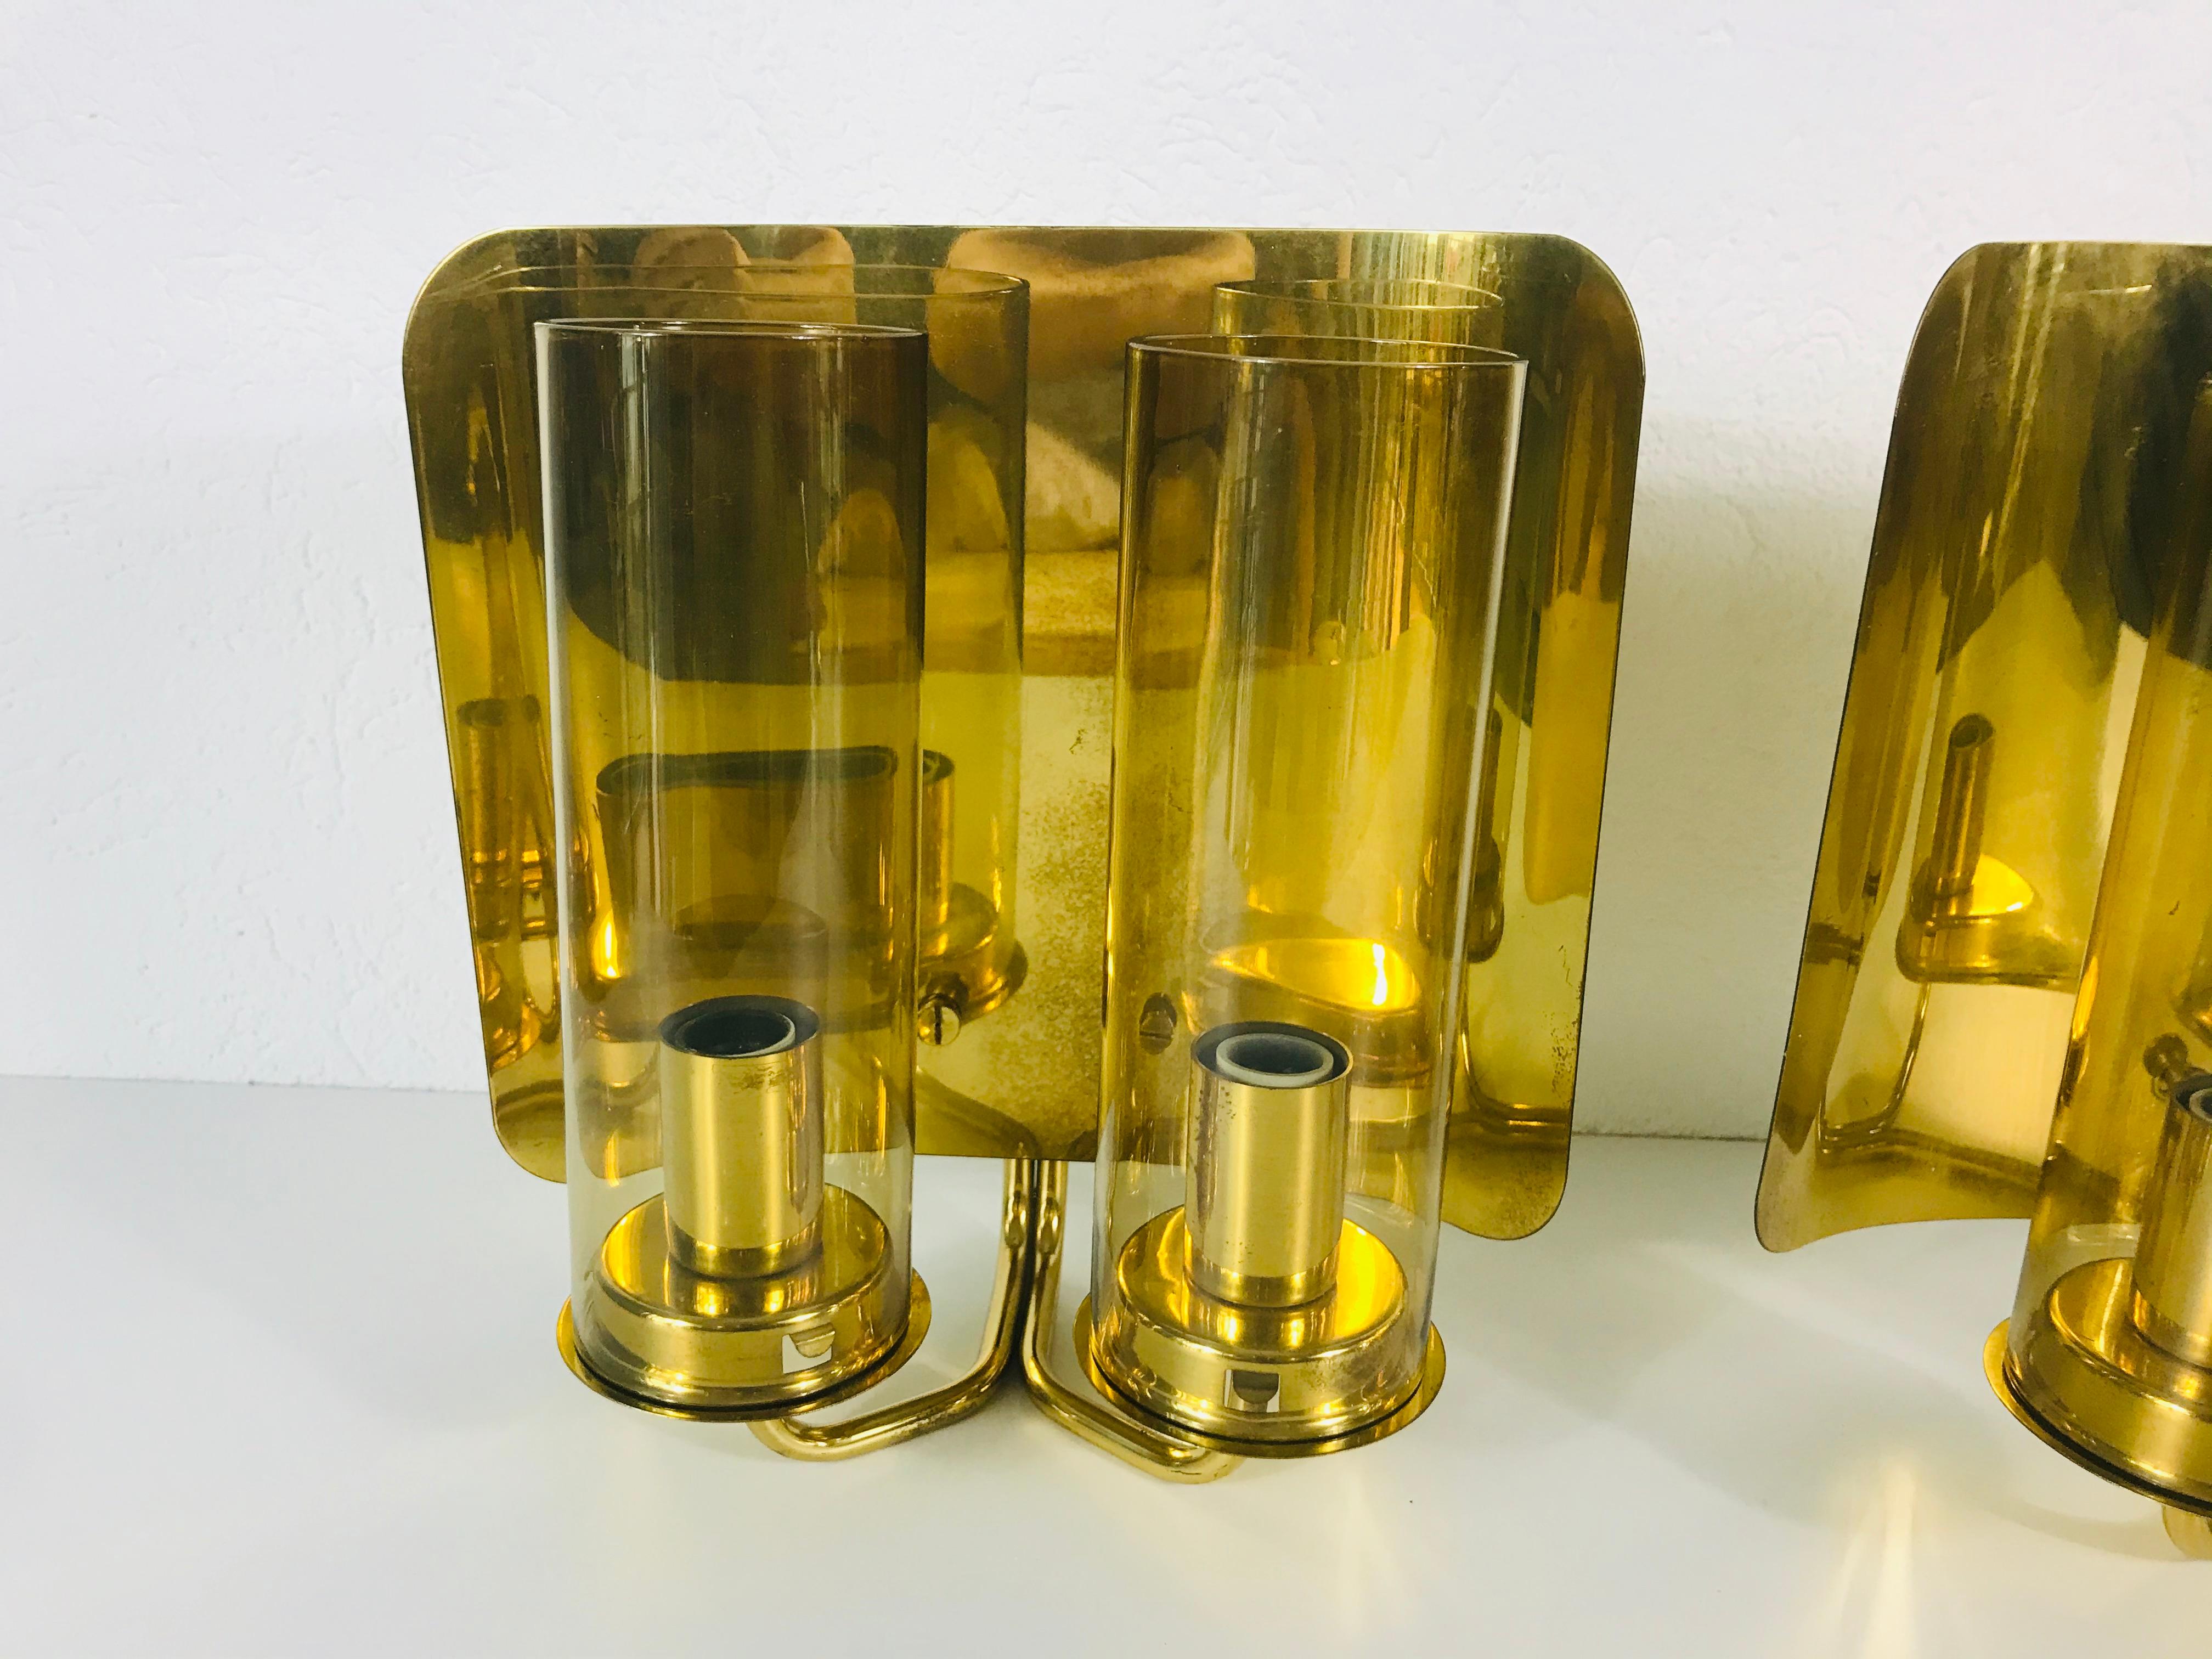 Pair of Mid-Century Modern Brass Sconces by Hans-Agne Jakobsson, Sweden, 1960s For Sale 2